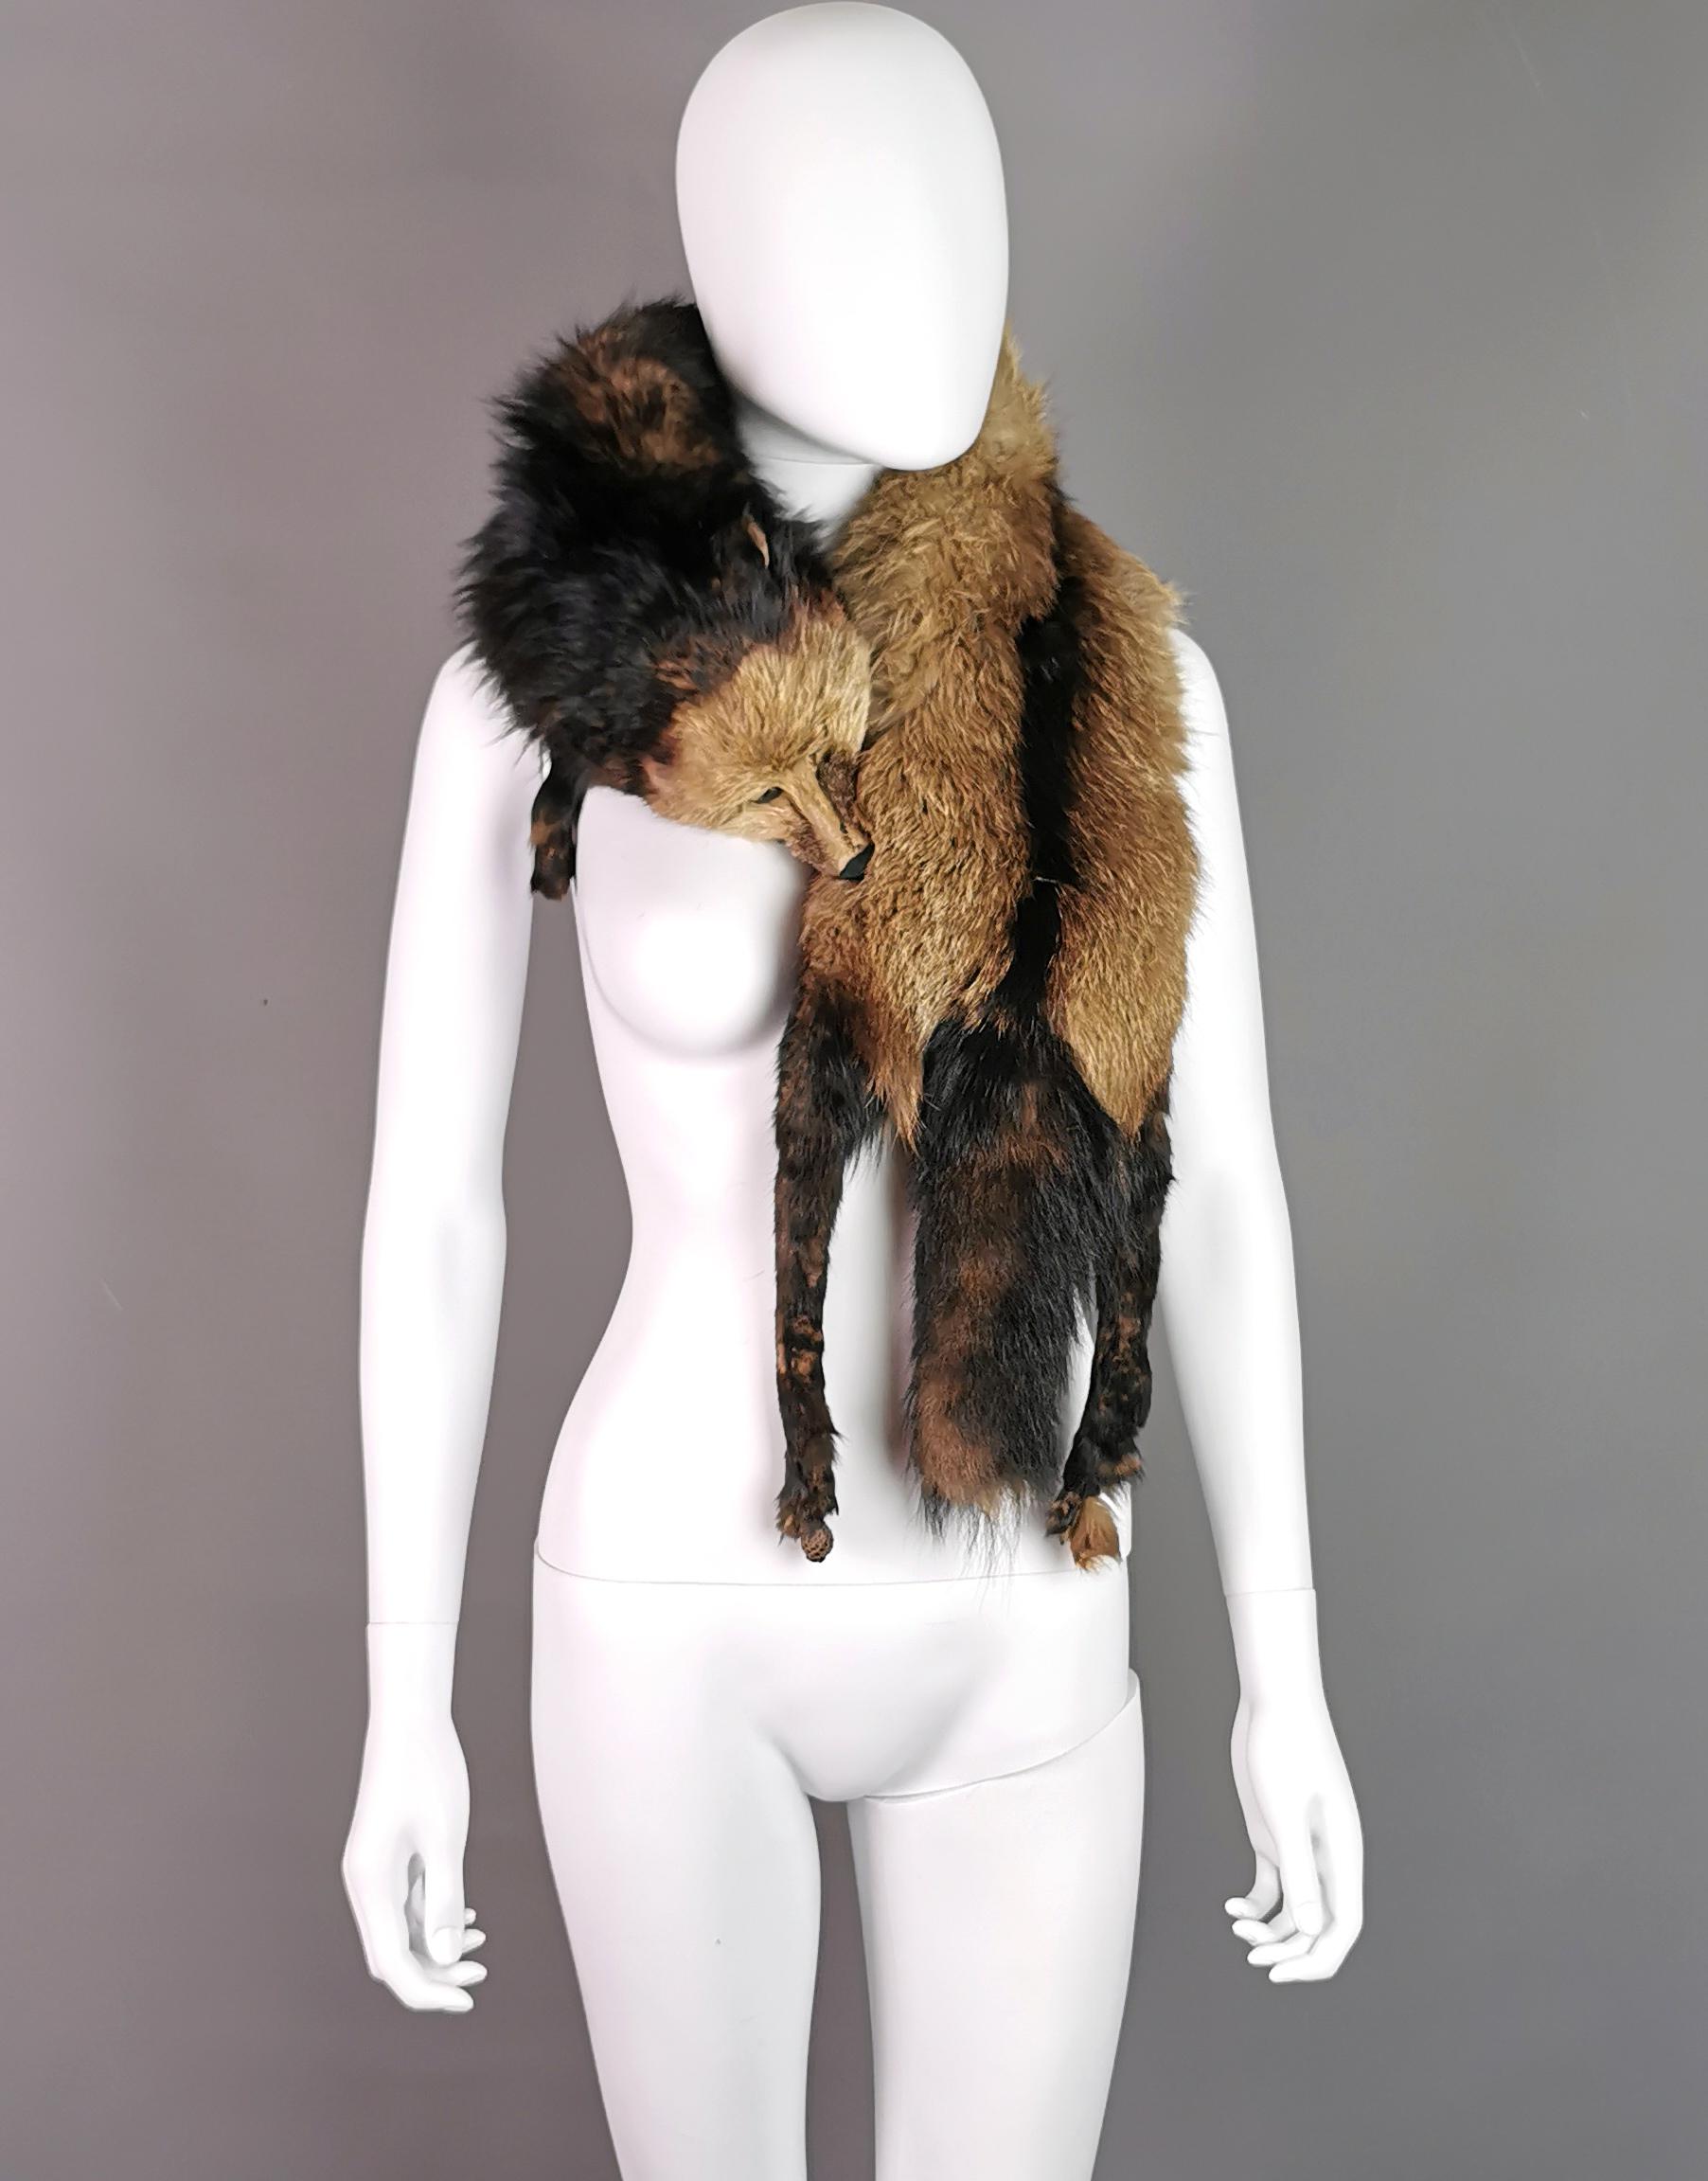 A beautiful vintage c1940s real fur stole or tippet.

It is a large and luxurious stole, made from high quality real marten fur with the head, tail and feet intact, one foot is missing, the stole has glass eyes and a celluloid clip under the head to